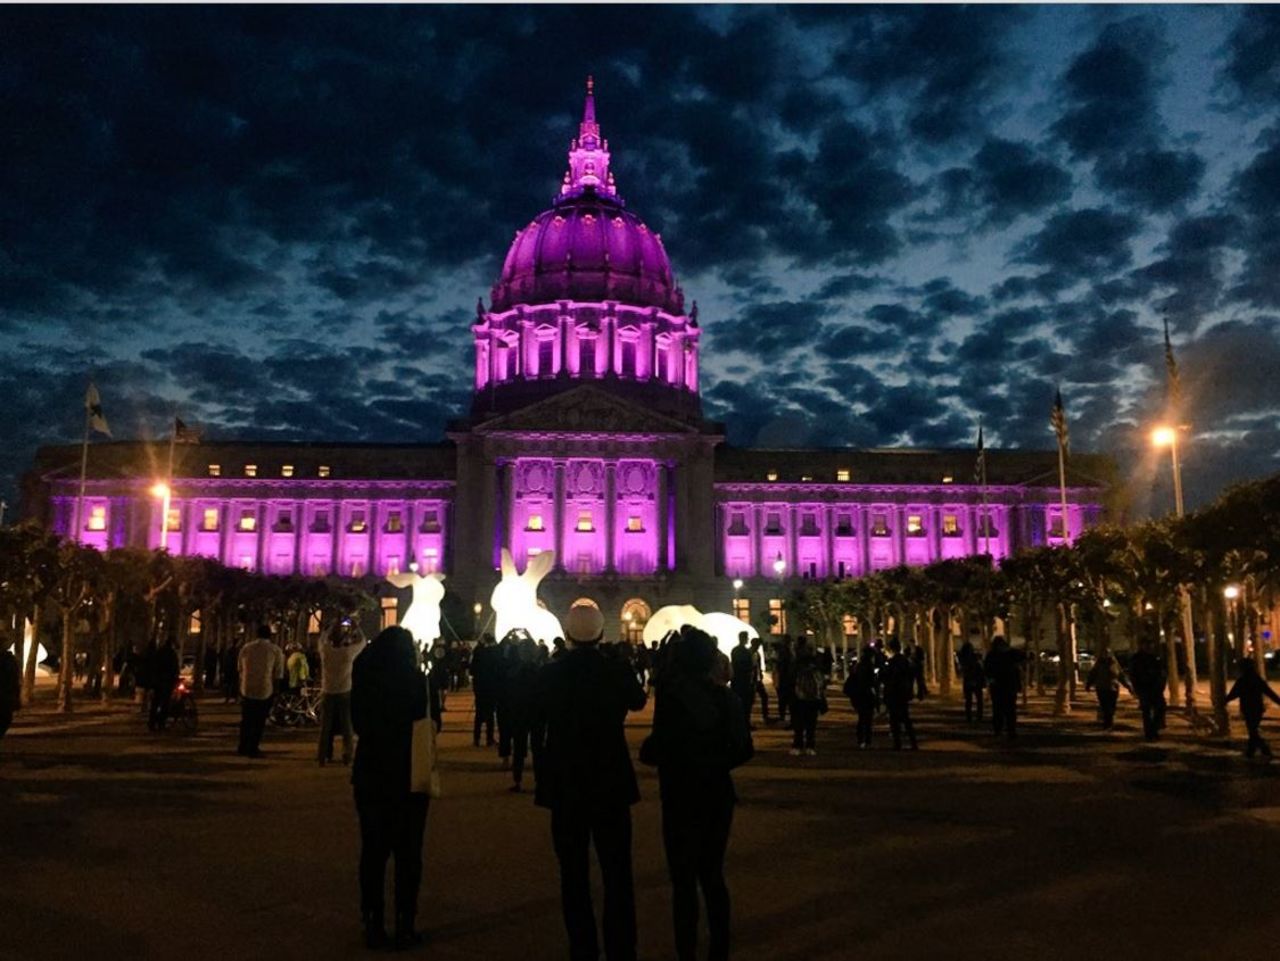 San Francisco's City Hall is seen bathed in purple light.